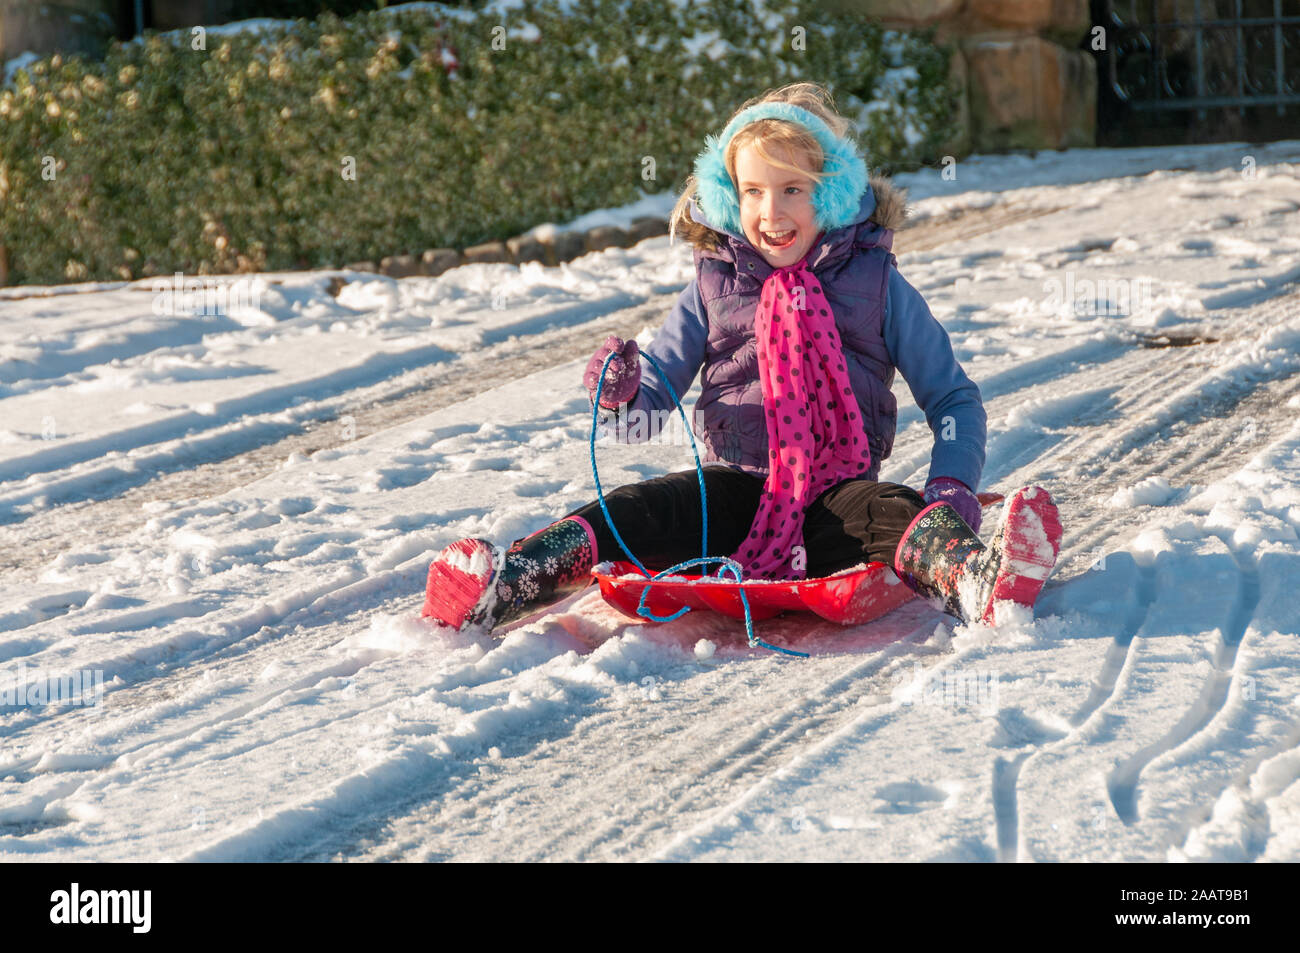 Laughing, vibrantly dressed young girl with blue ear muffs sledging down a slope Stock Photo